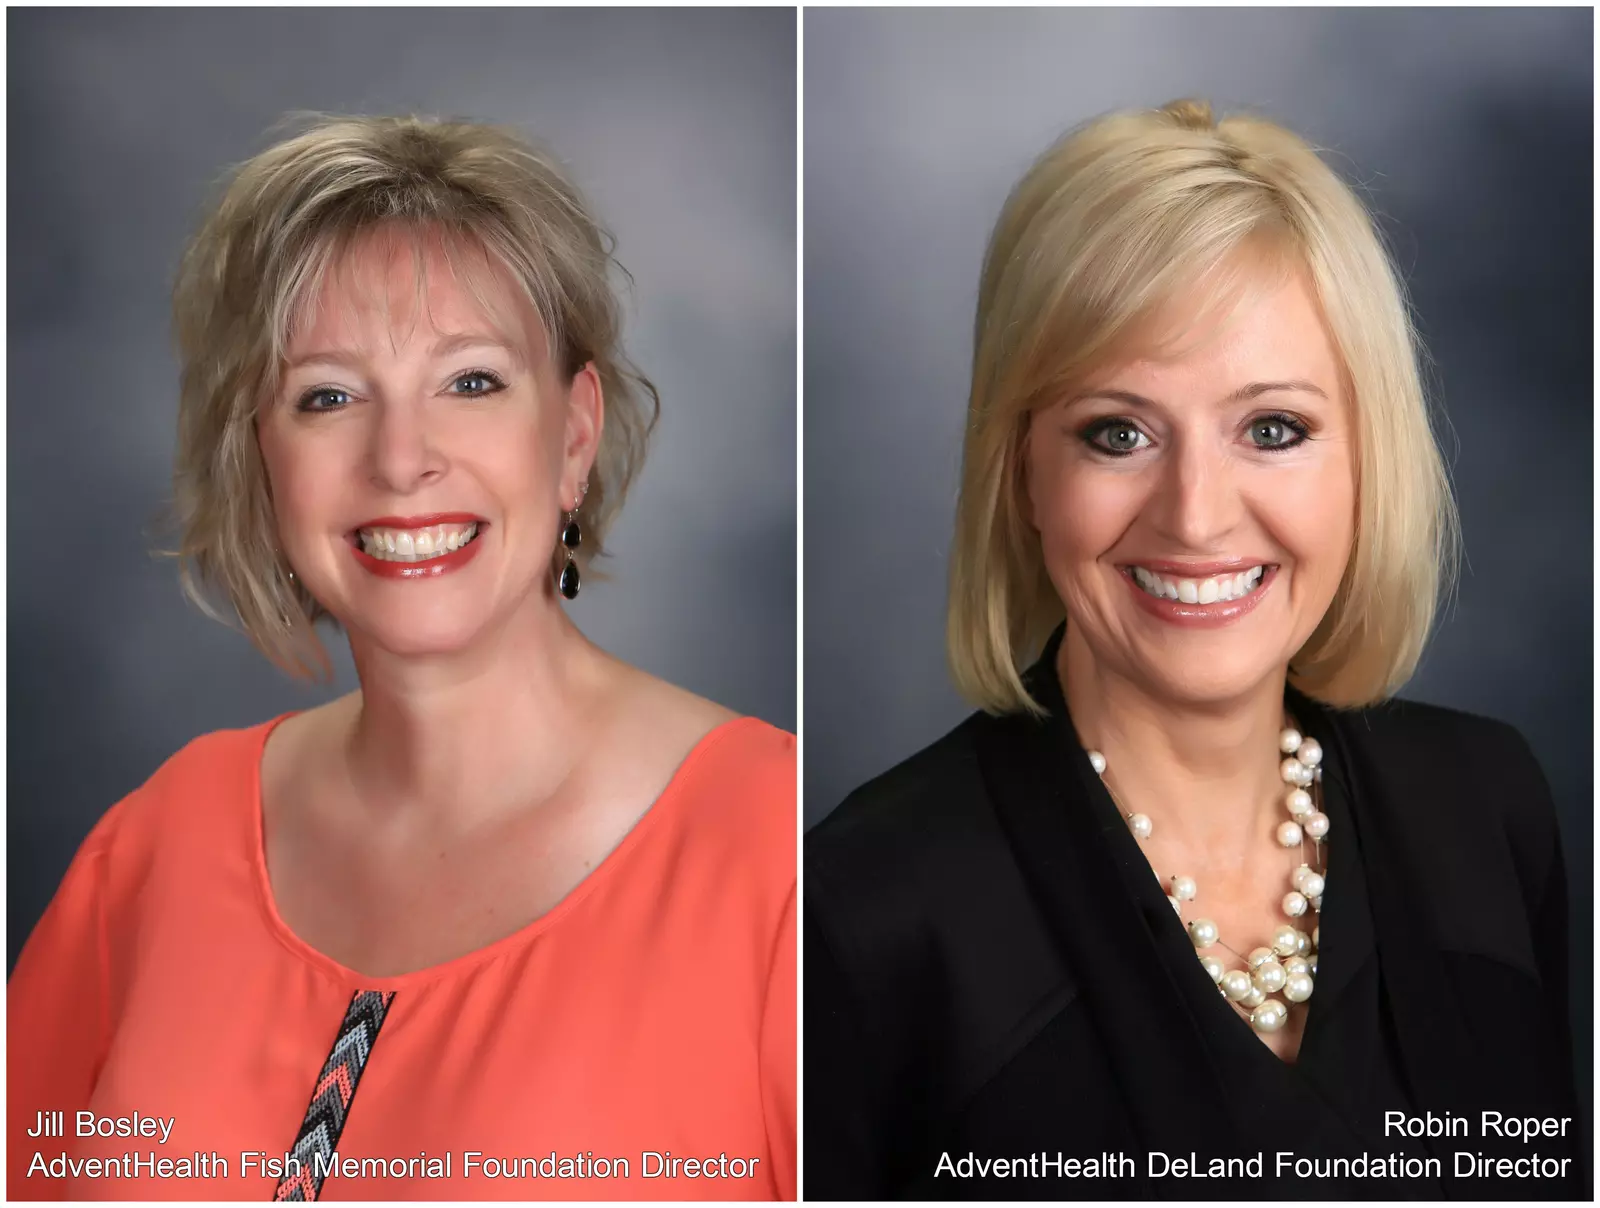 New Foundation Directors for West Volusia